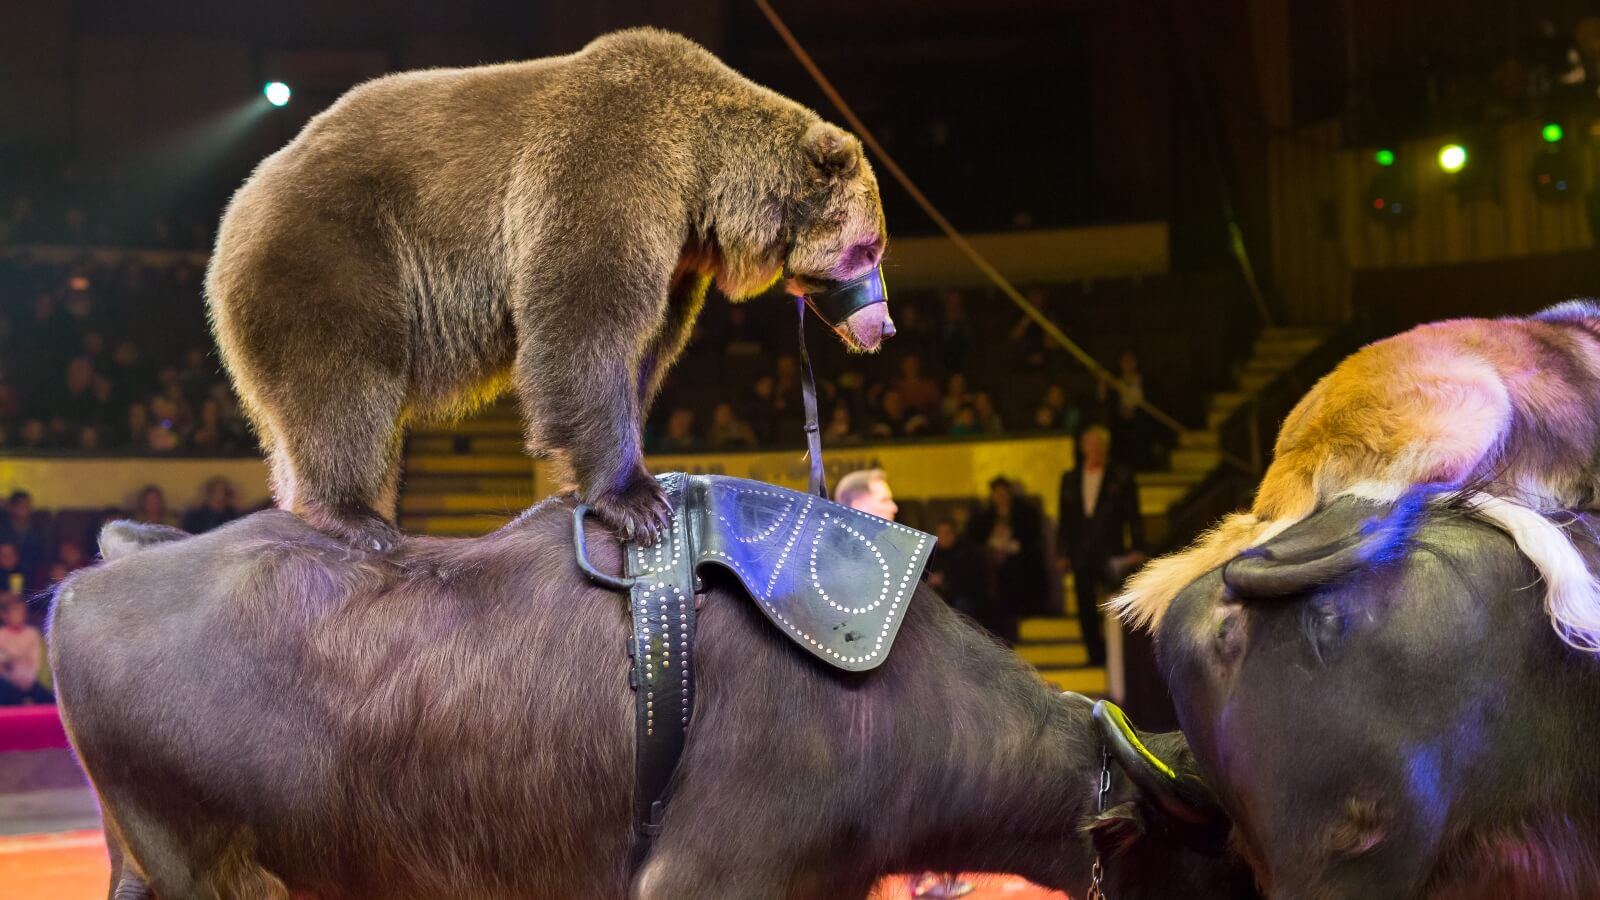 France Bans Wild Animals In Circuses, Mink Farming, And Dolphin Shows -  Plant Based News